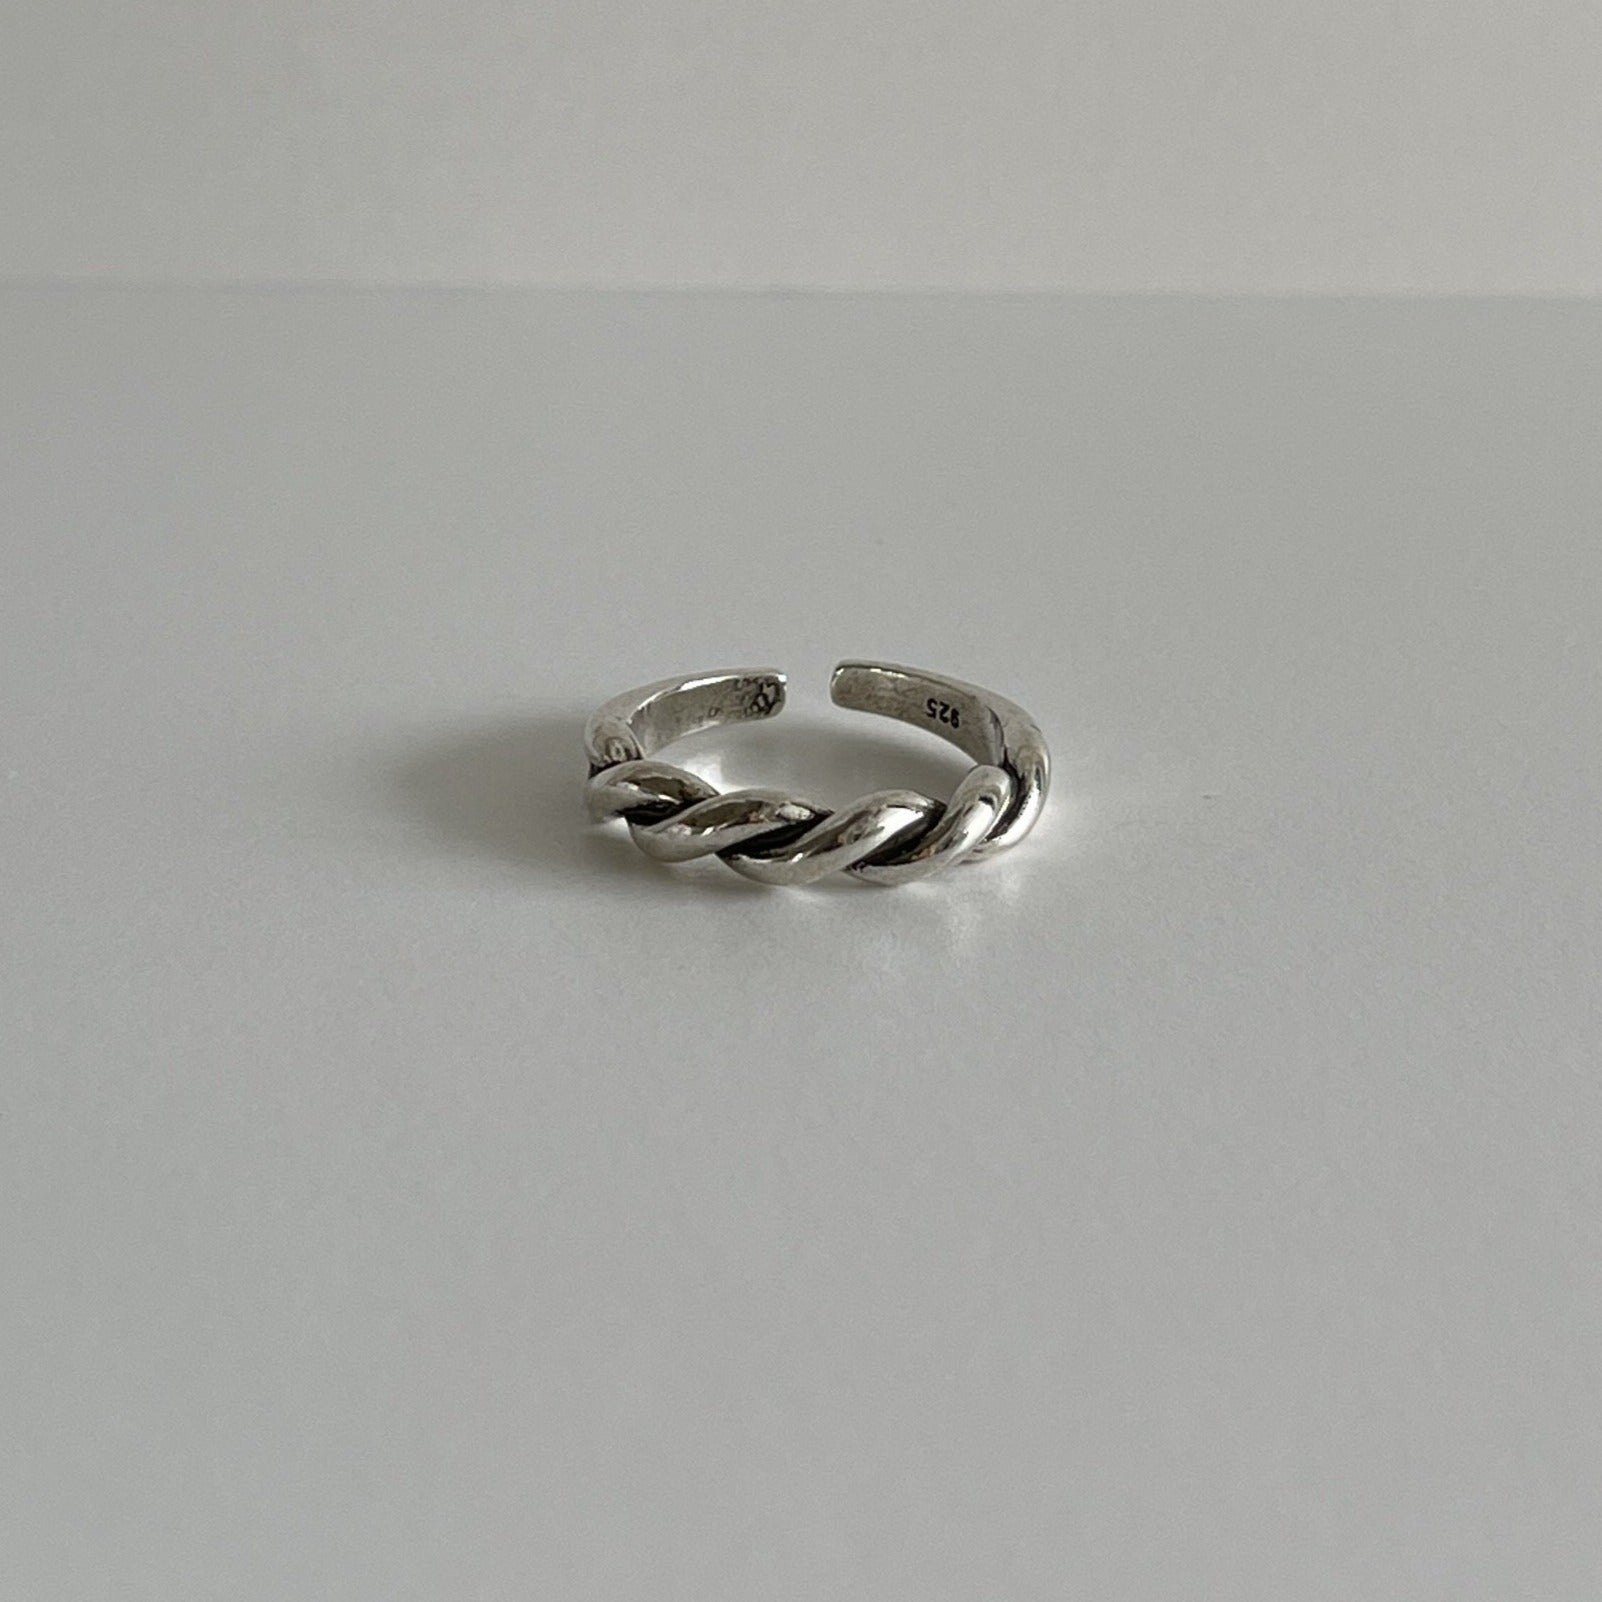 Silver925 ring【S925刻印あり】